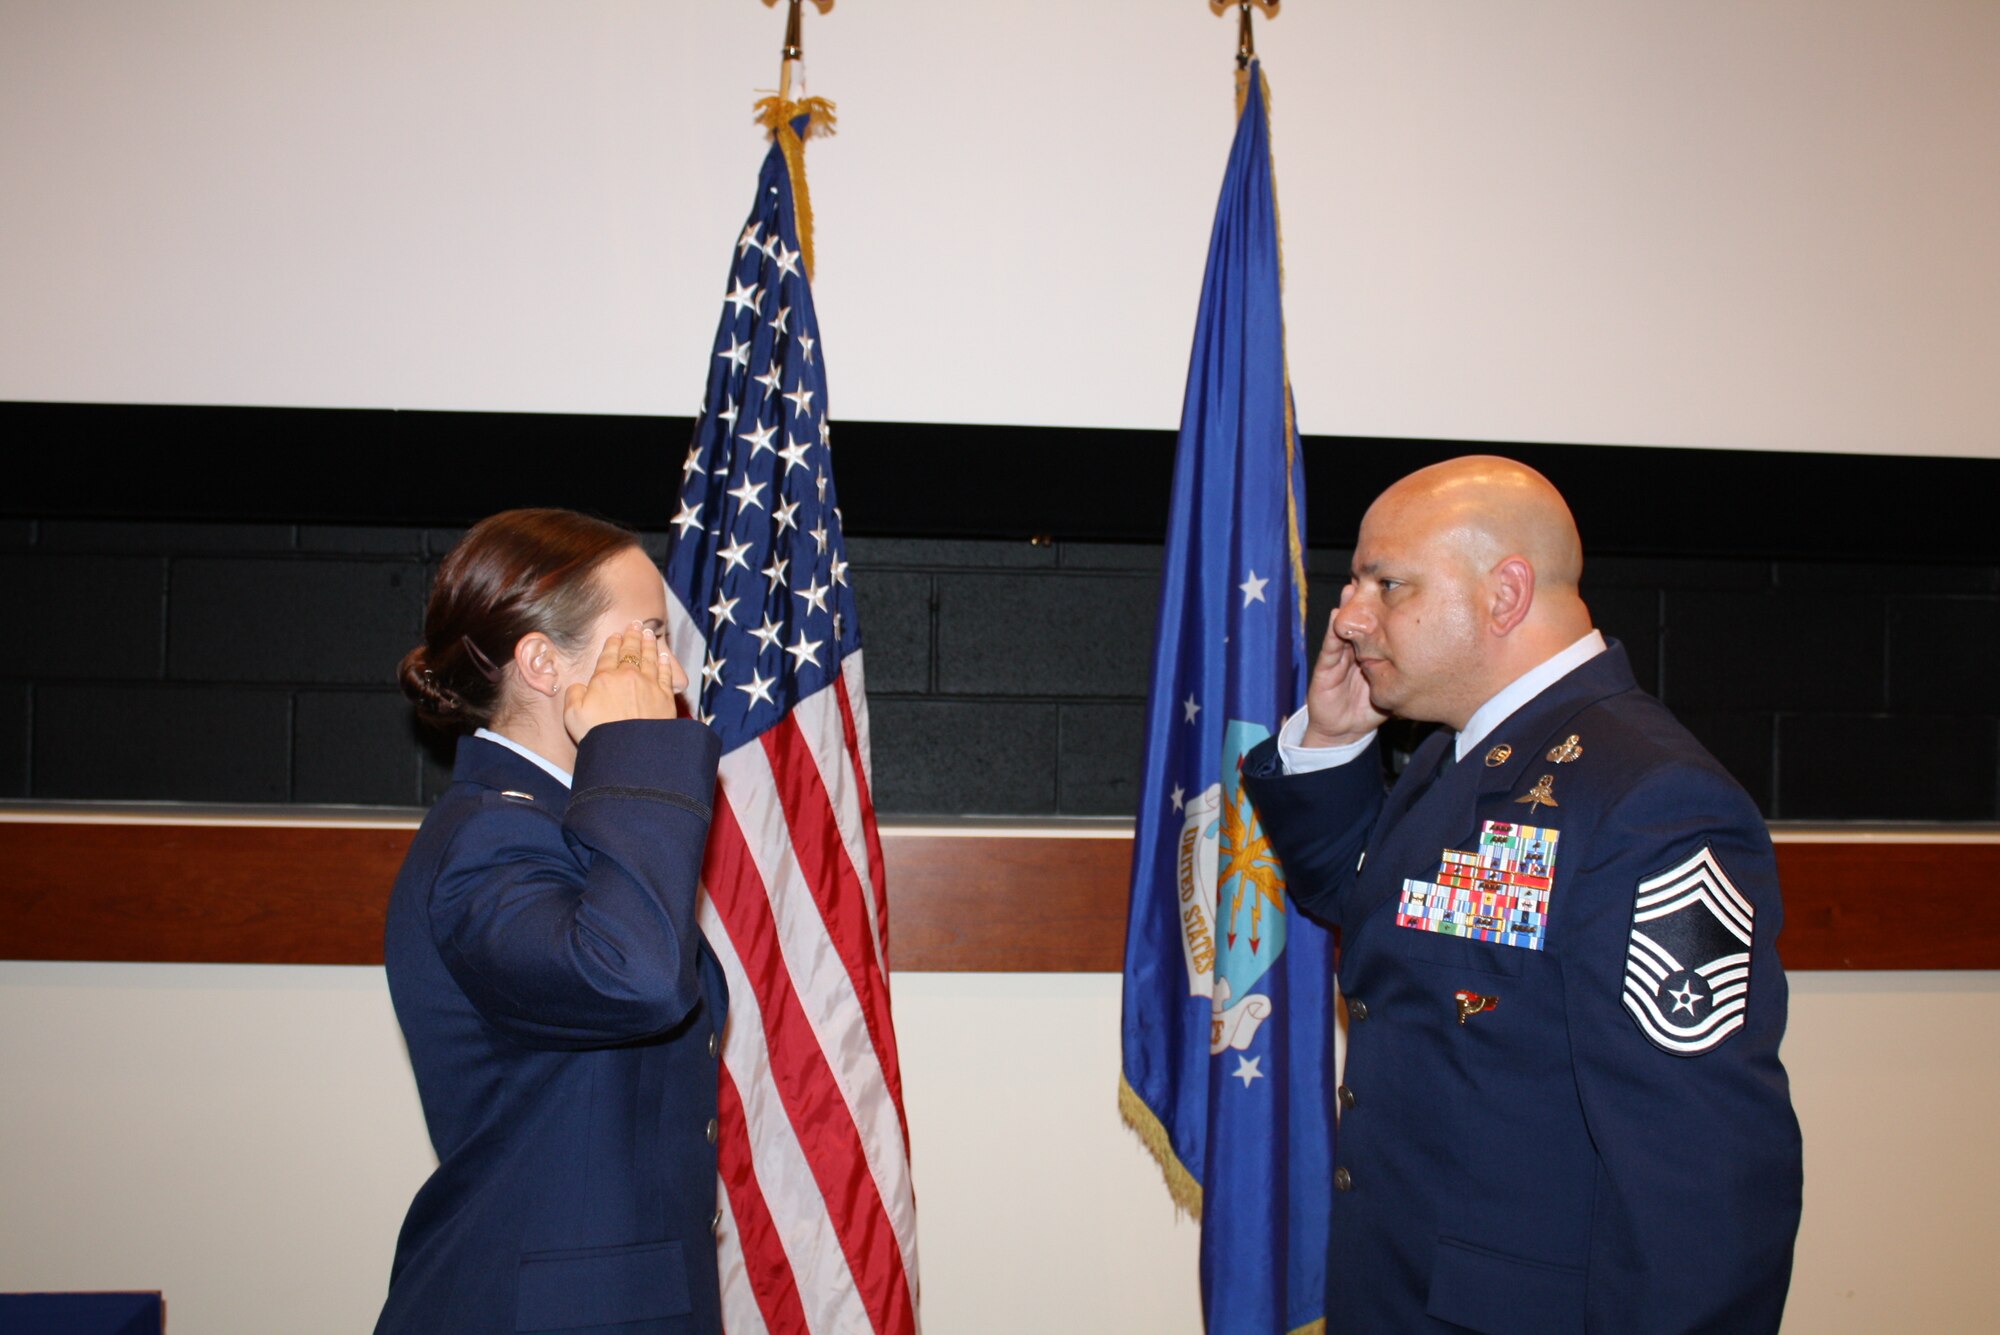 Chief Master Sgt. Jason Colon, 91st Operations Group superintendent, gives his daughter her first salute during her commissioning ceremony at East Carolina University, May 9, 2015. 2nd Lt. Jenna Colon is continuing a family tradition of military service that stretches back to the Korean War. (Courtesy photo)